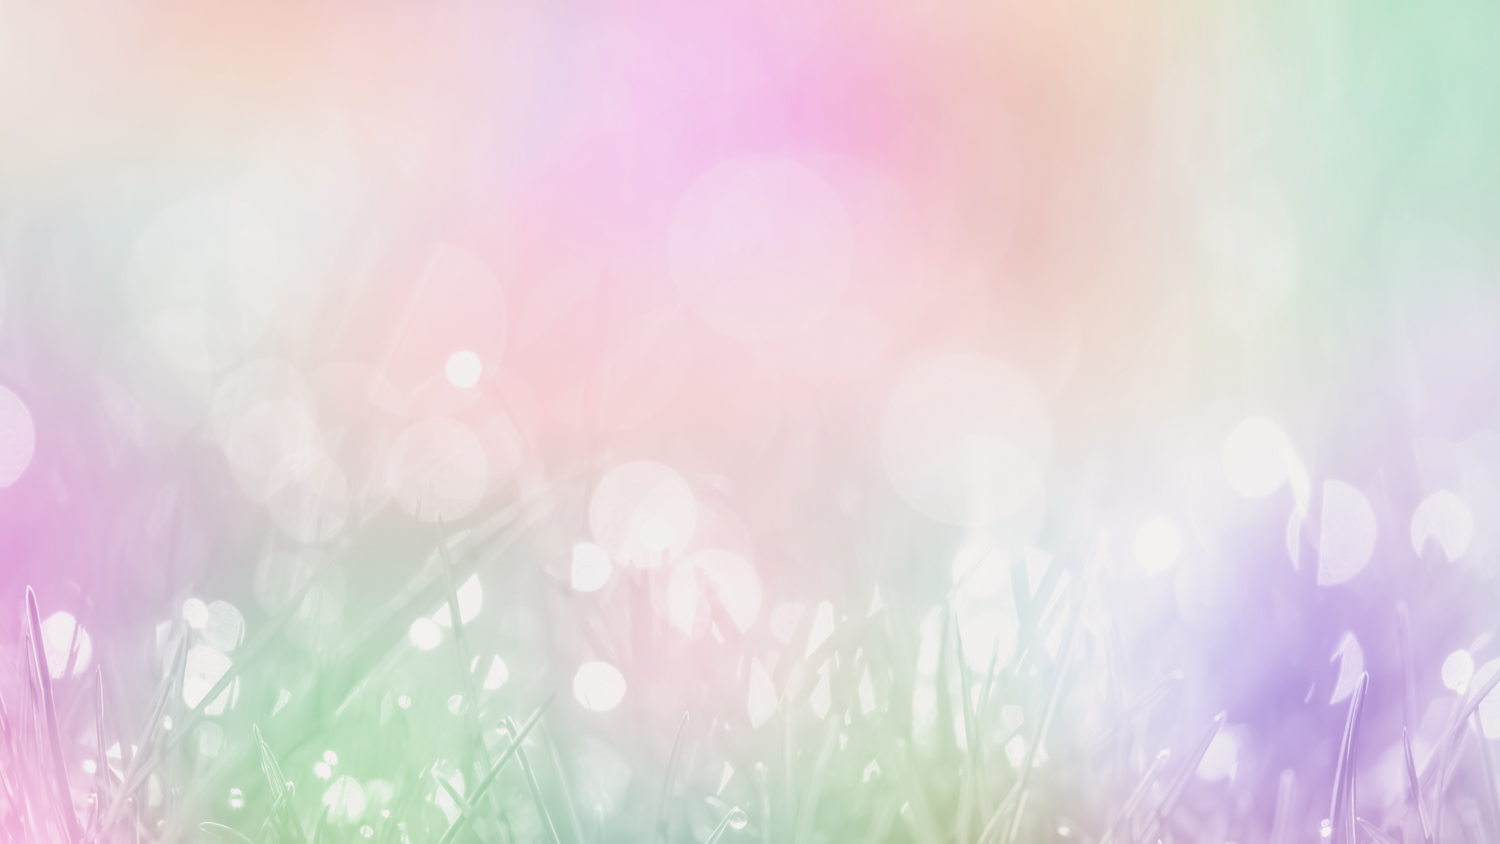 A dreamy, pastel color blend filter over a patch of glistening grass